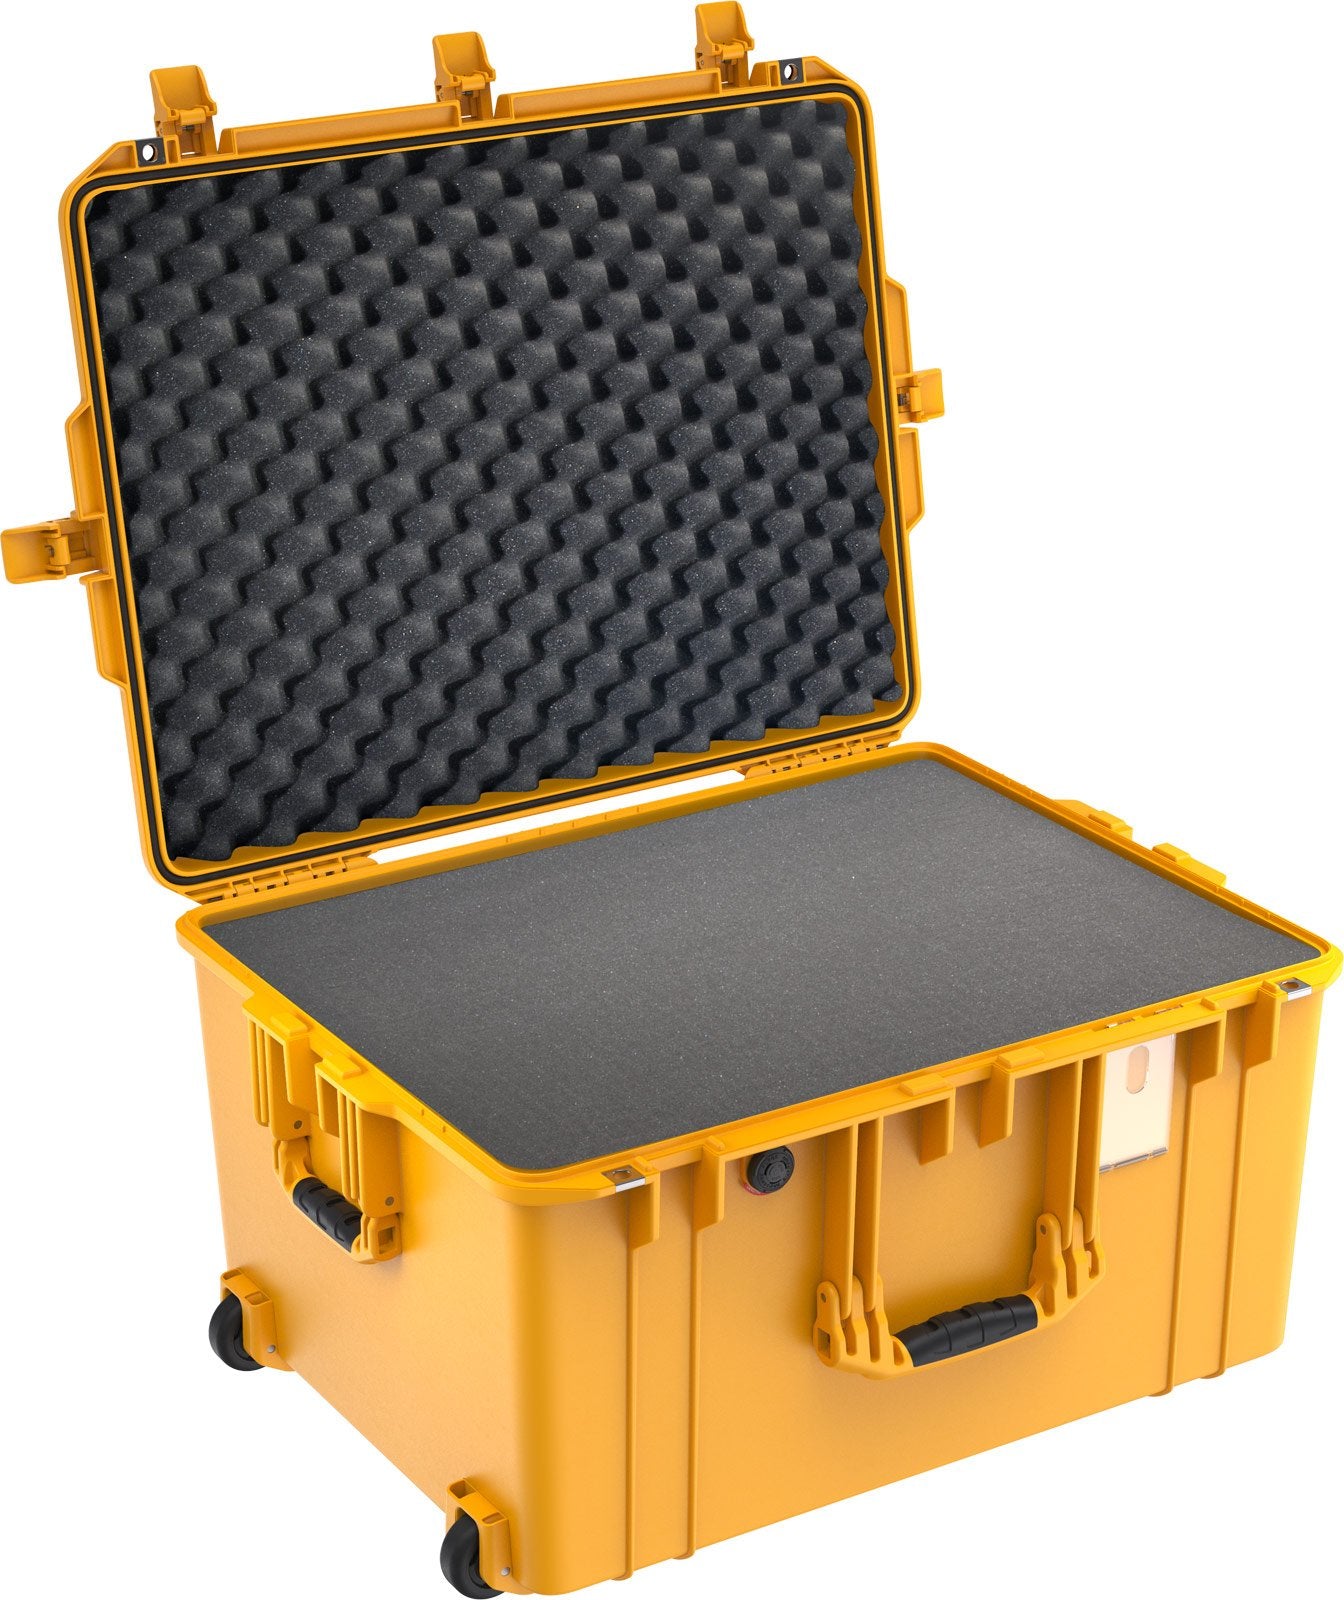 Pelican Protector Case 1637 Air Case - With Foam